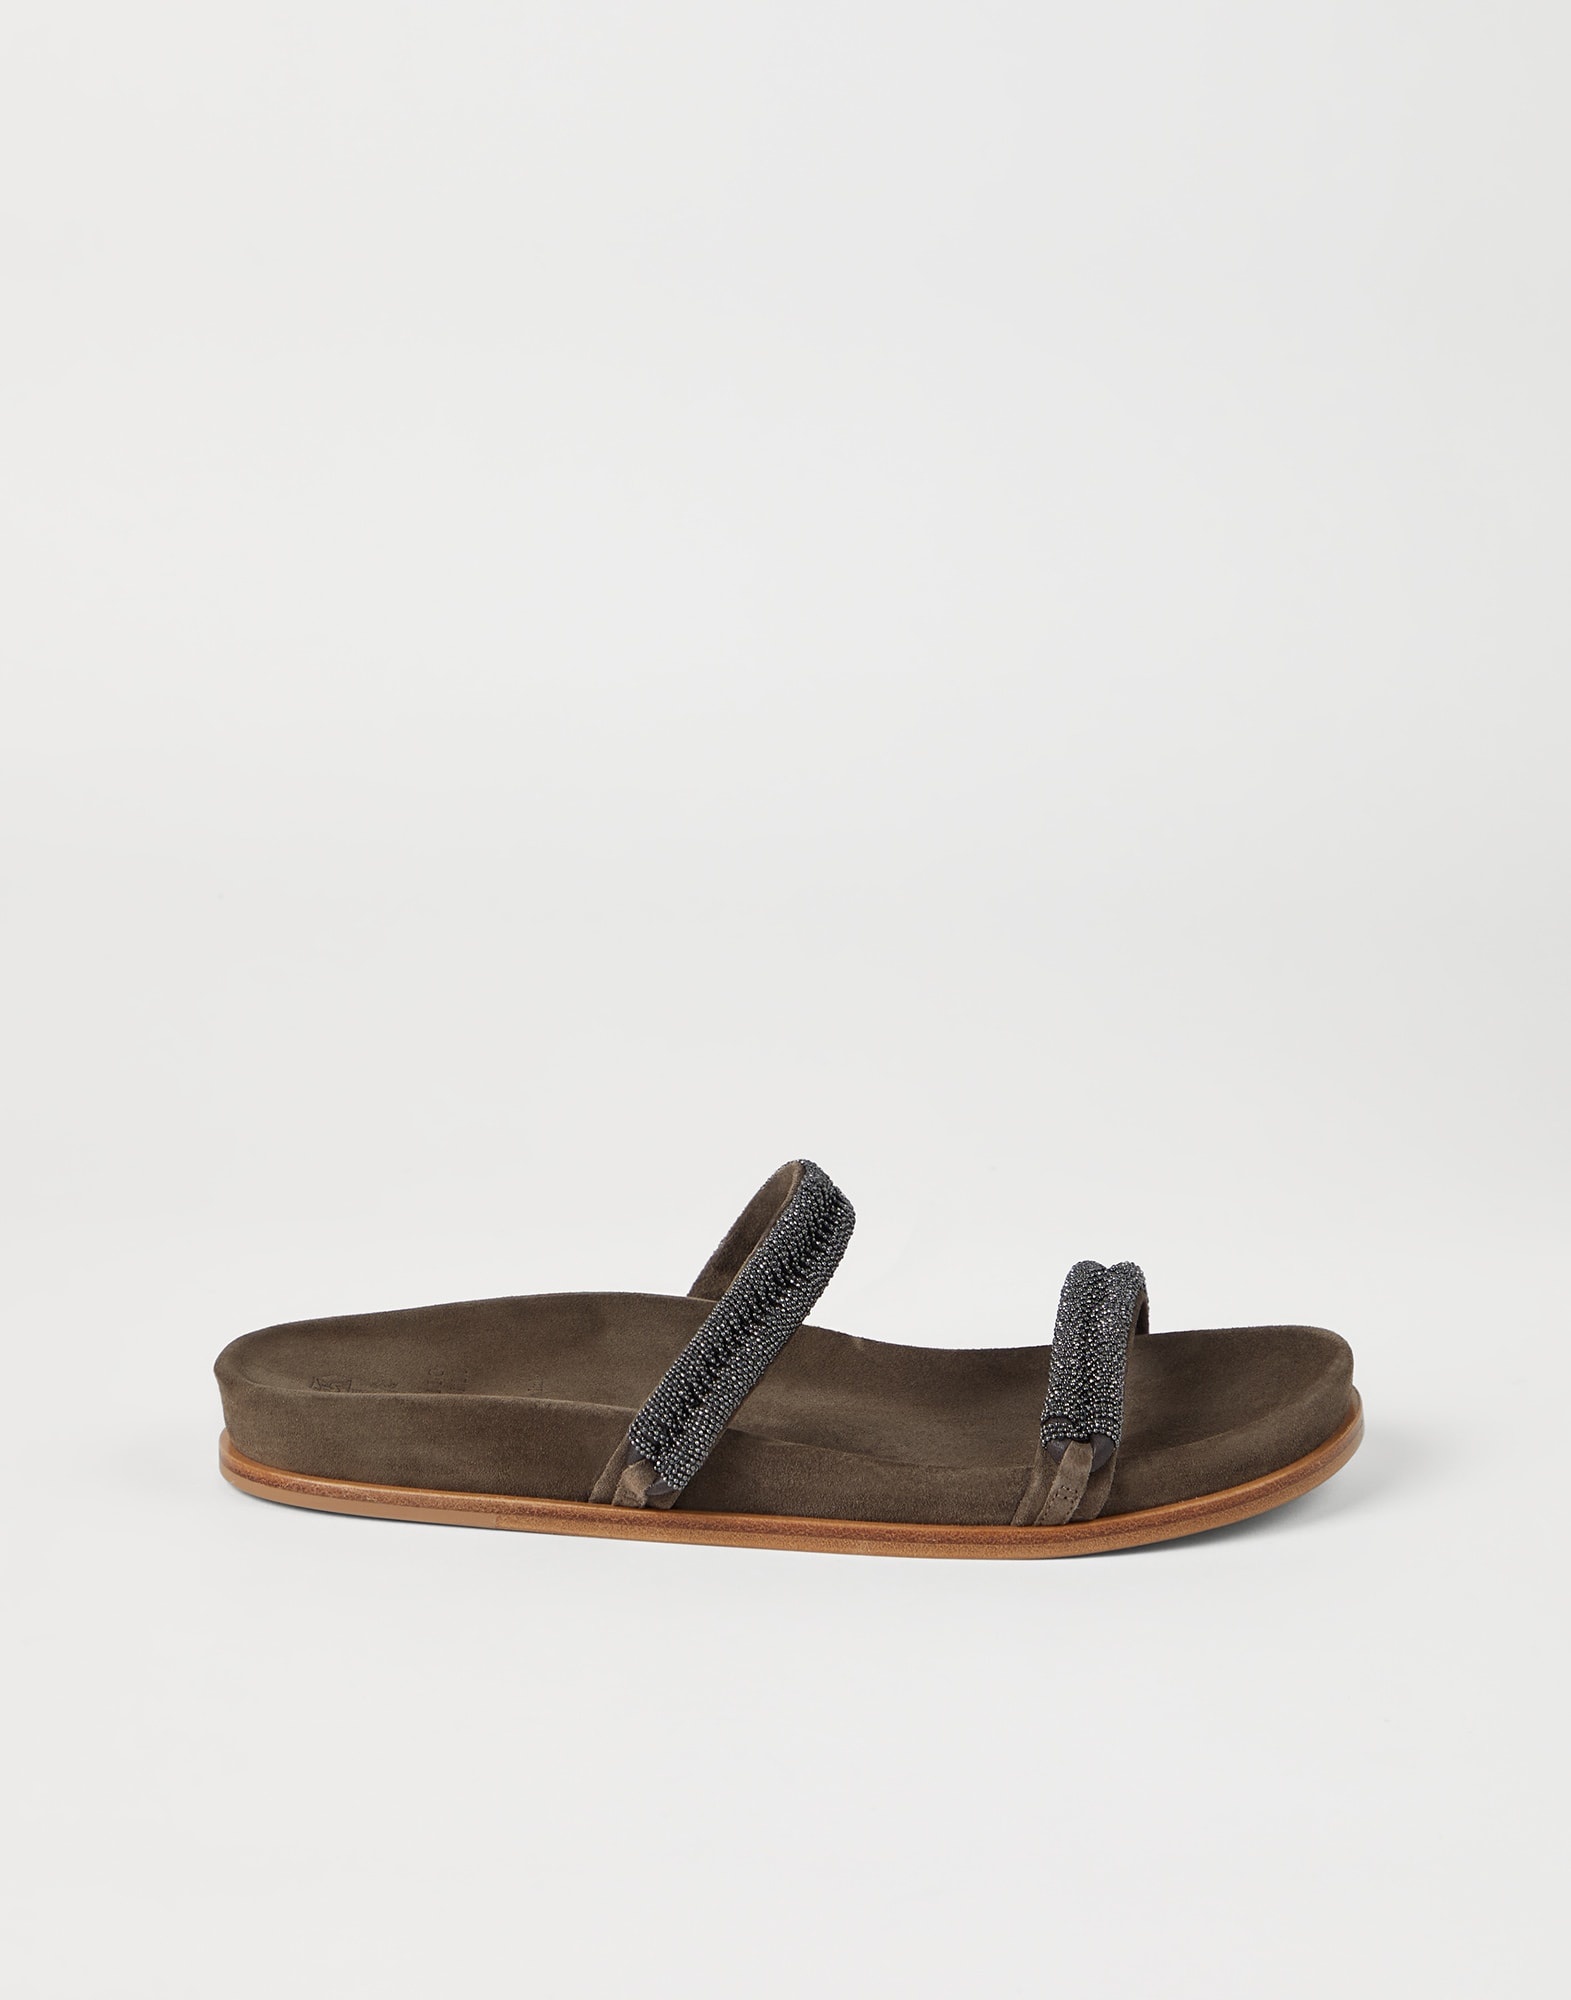 Suede slides with precious braided straps - 5